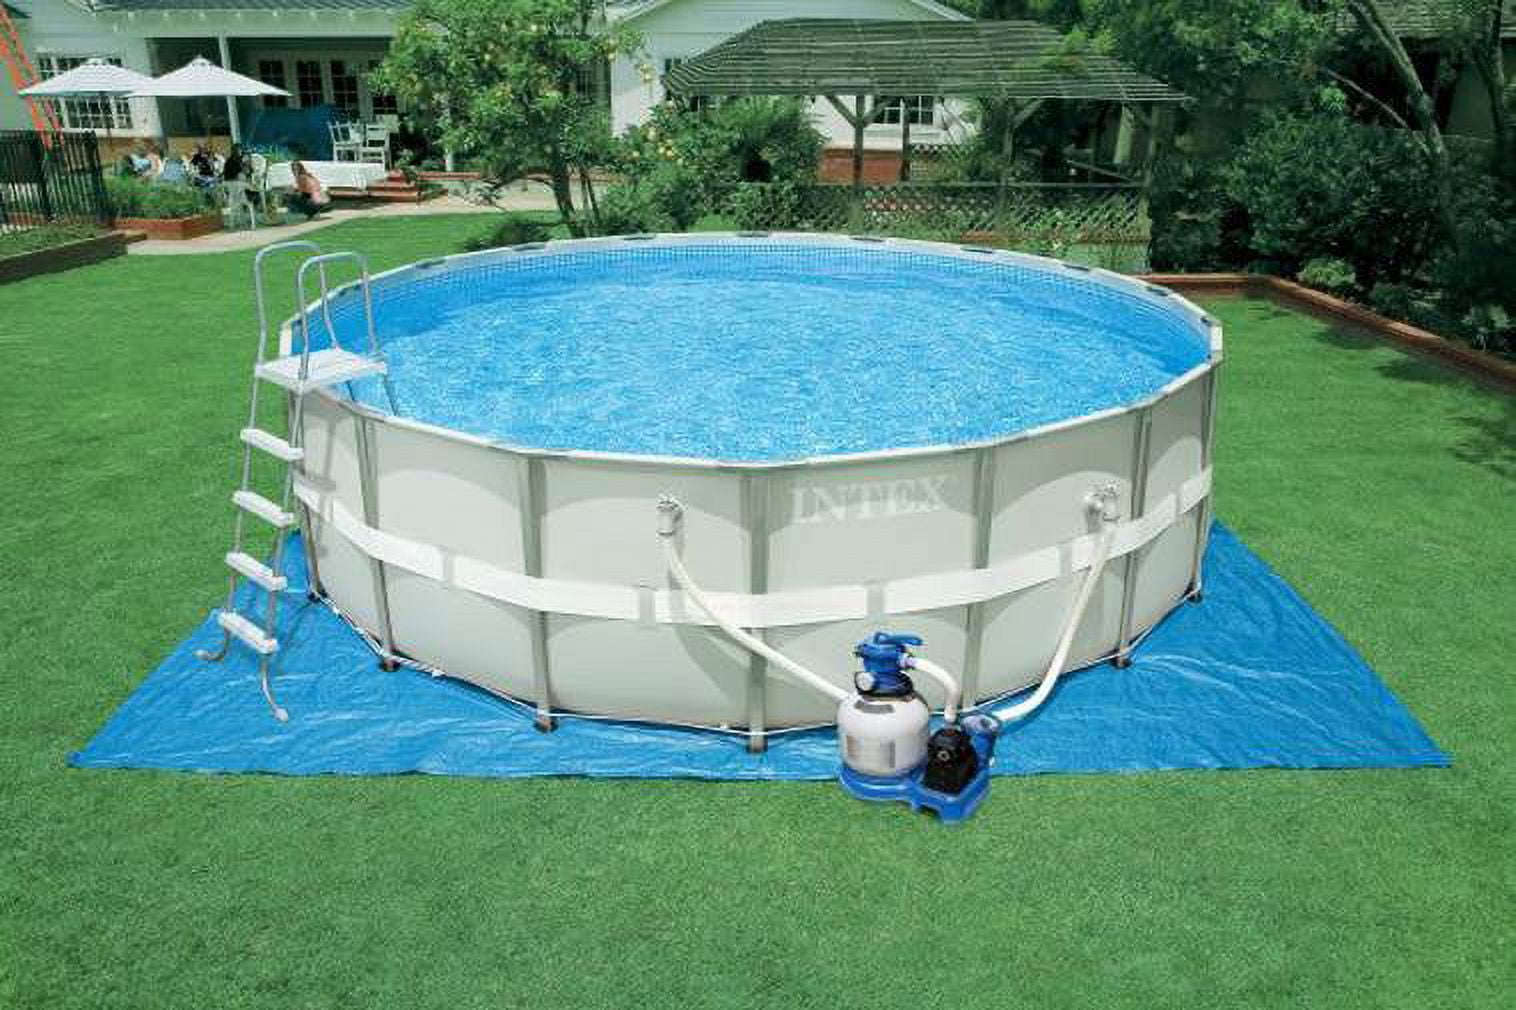 ahmad beckham recommends intex above ground pools 18 x 52 pic